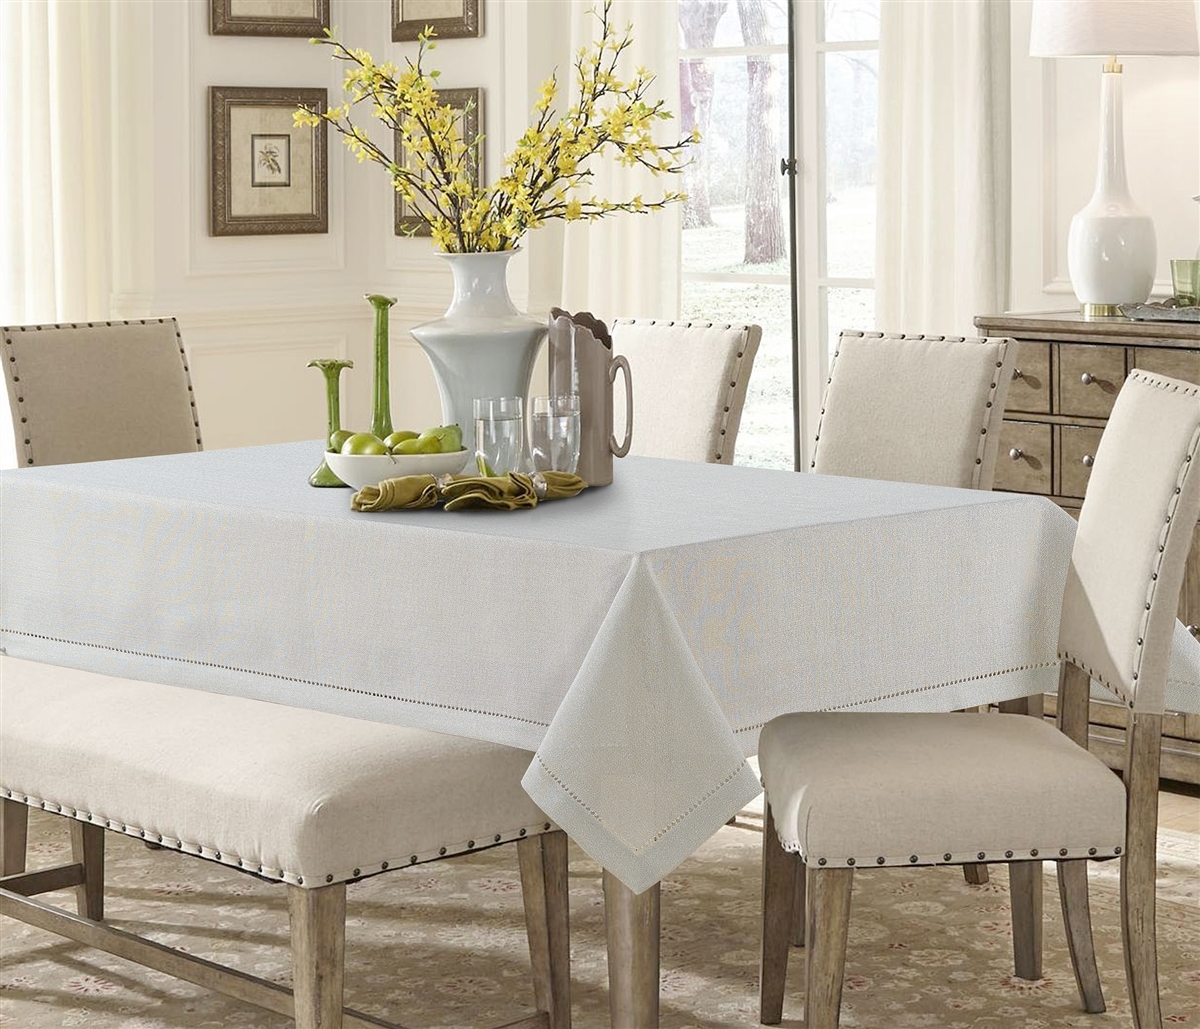 White Linen Like Tablecloth - Luxury Table Covers